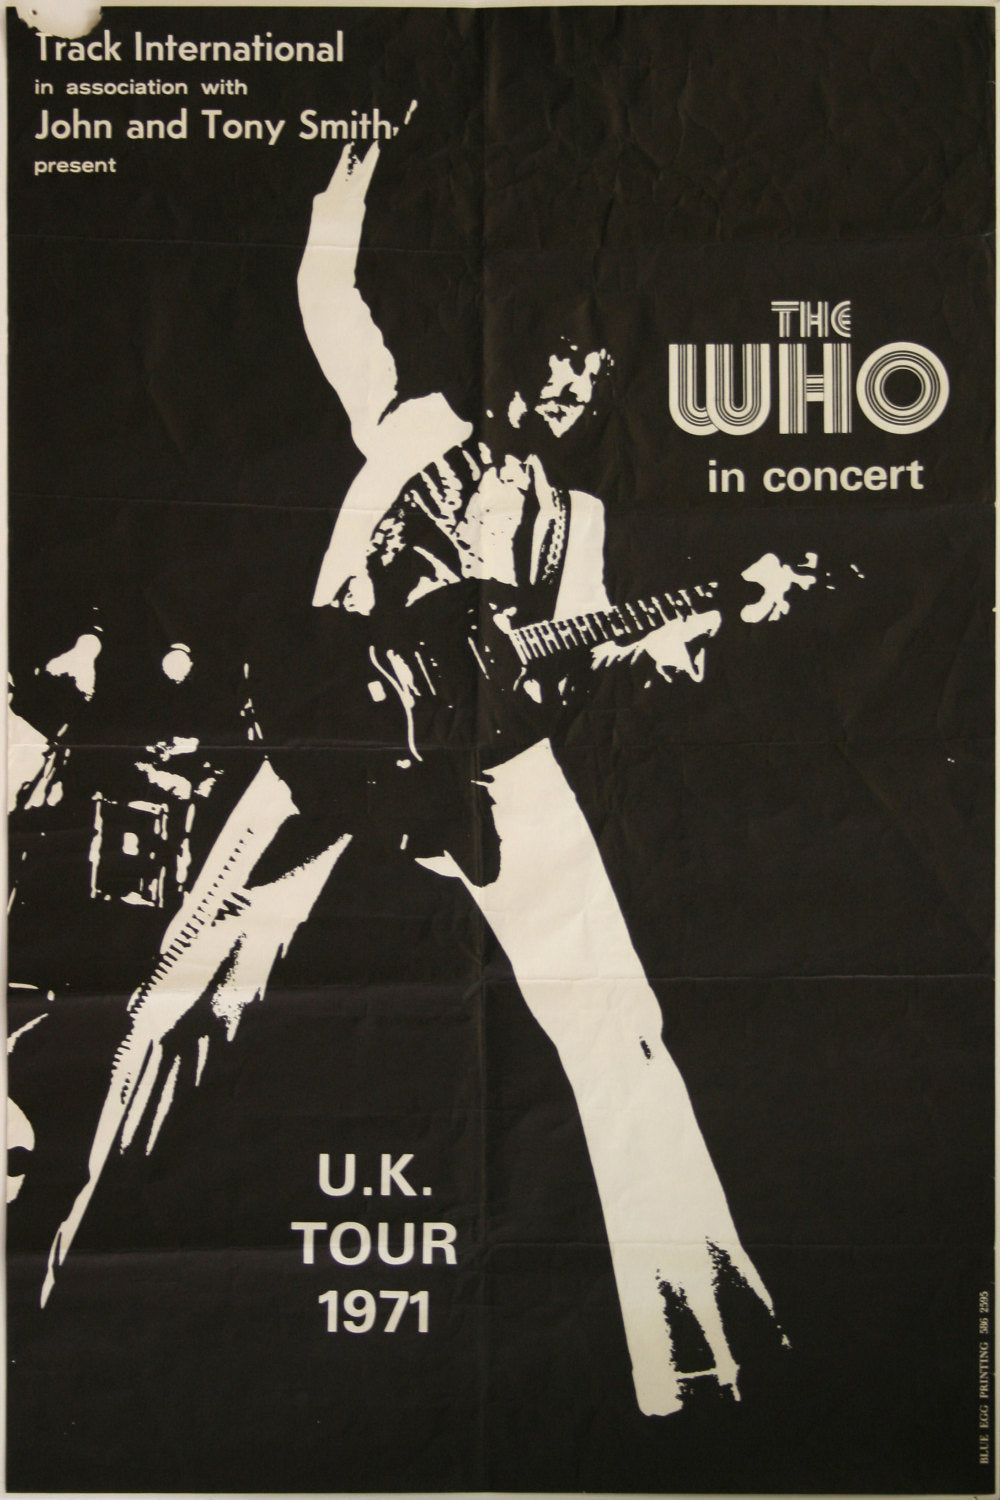 Vintage Music Art Poster - The Who UK Tour 1971 - 0275